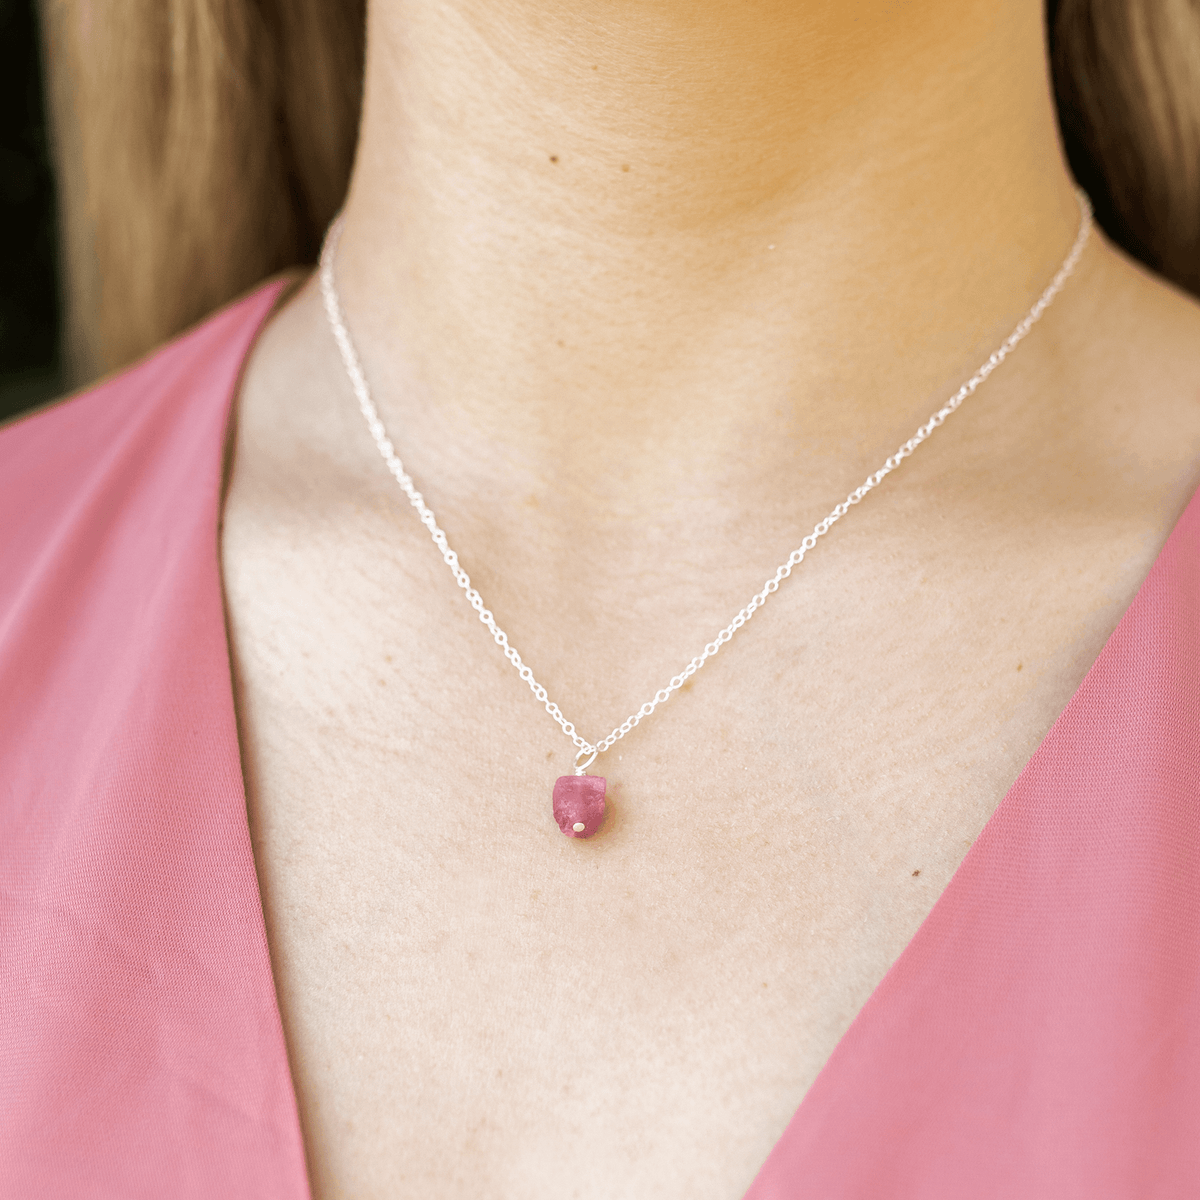 Raw Pink Tourmaline Crystal Earrings & Necklace Set - Raw Pink Tourmaline Crystal Earrings & Necklace Set - Sterling Silver / Cable - Luna Tide Handmade Crystal Jewellery